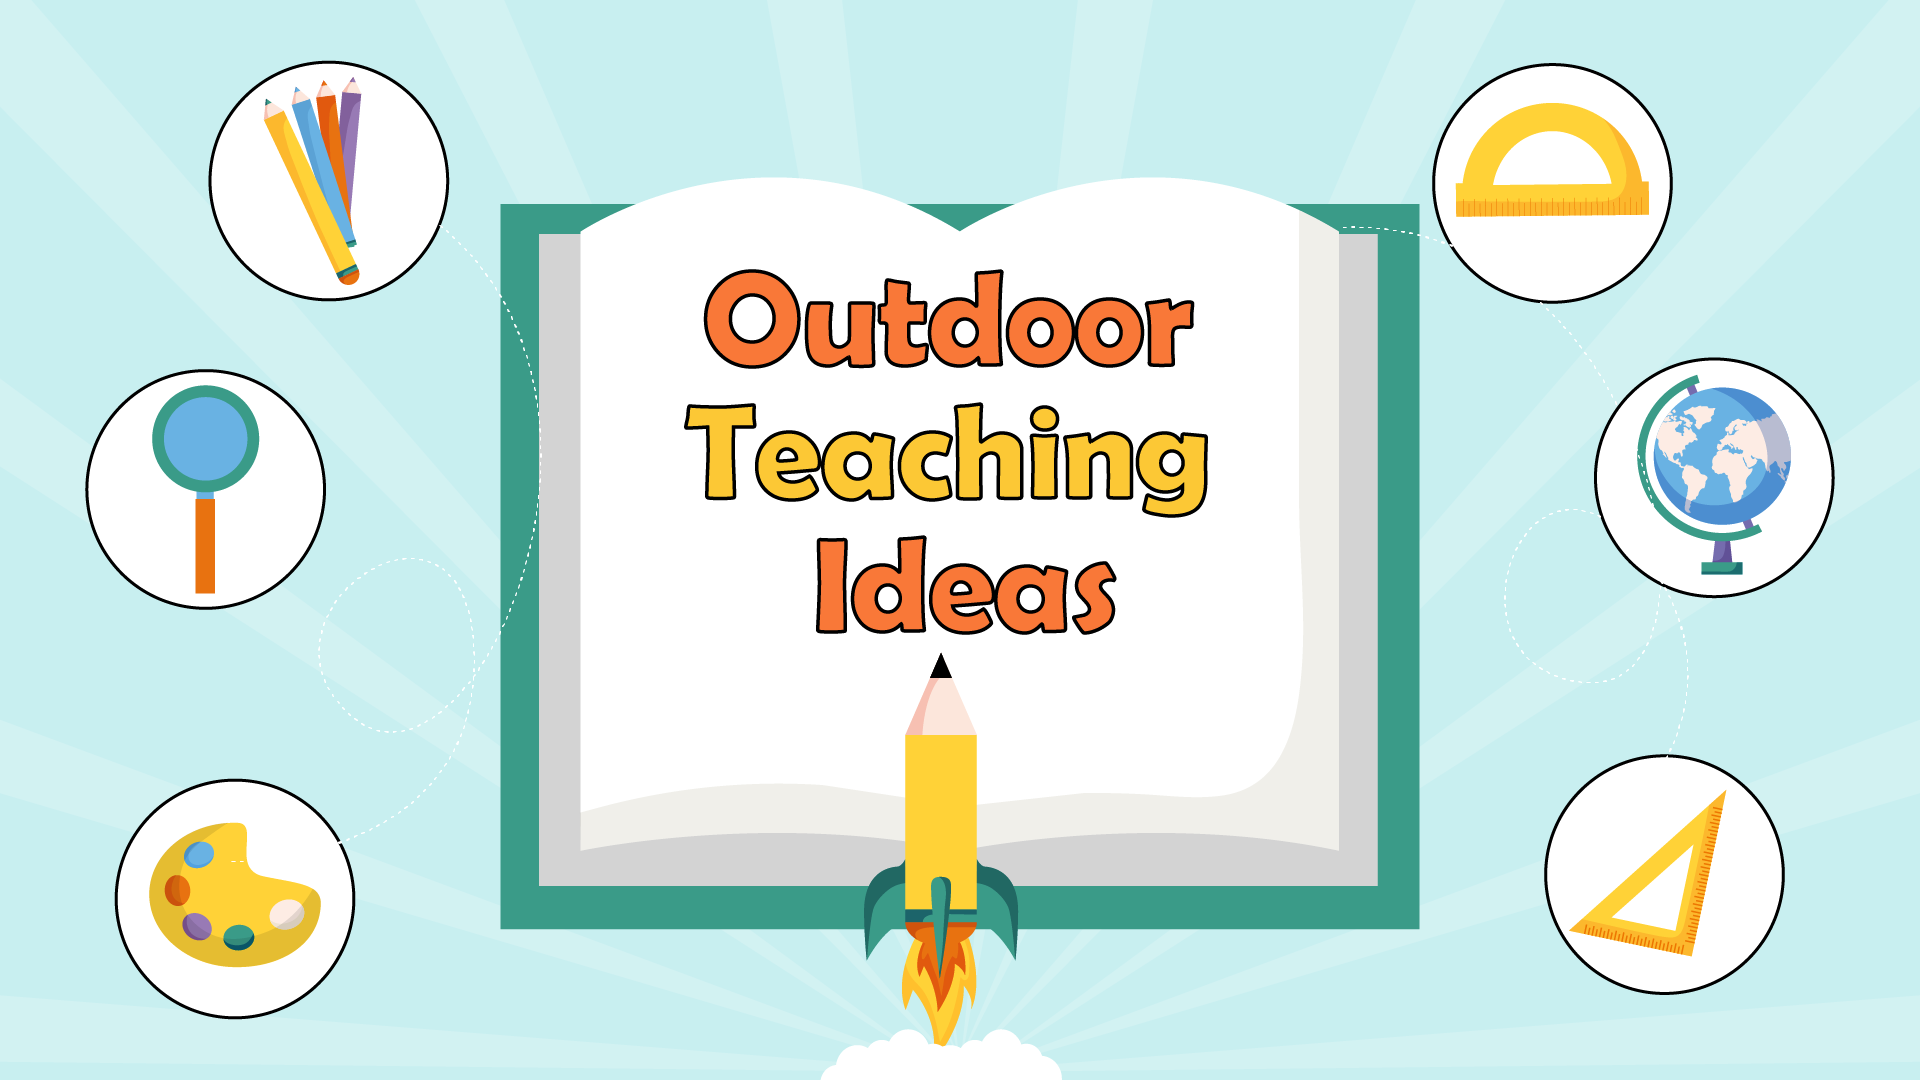 Outdoor Teaching Ideas: 4 Exciting Ideas about The World Around You